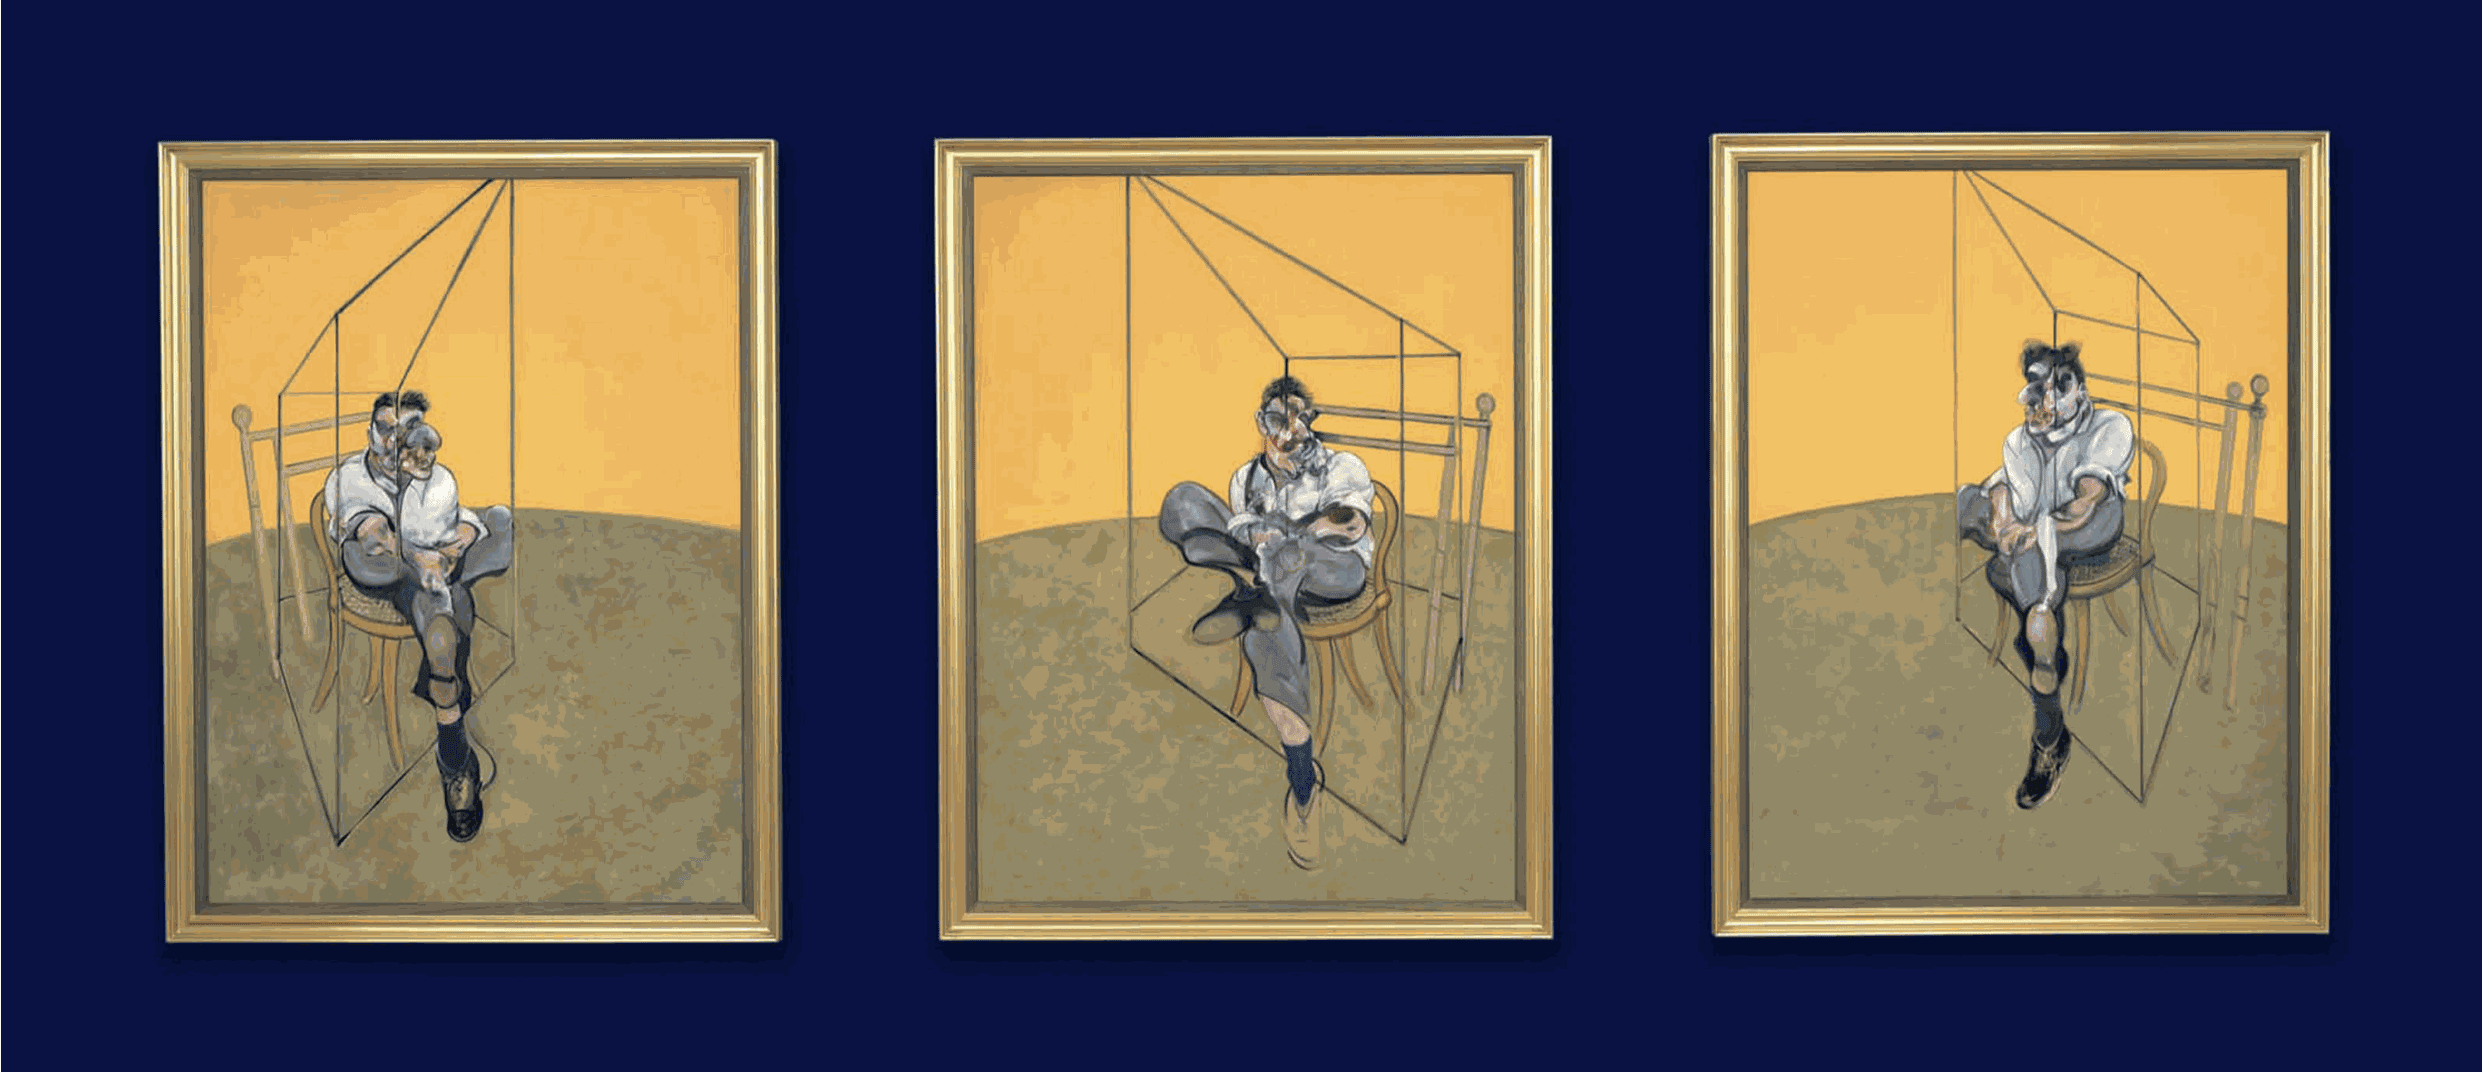 Francis Bacon, Three Studies of Lucien Freud, 1969. It is Bacon's record auction sold in 2013 at Christie's , for $142.4 million.